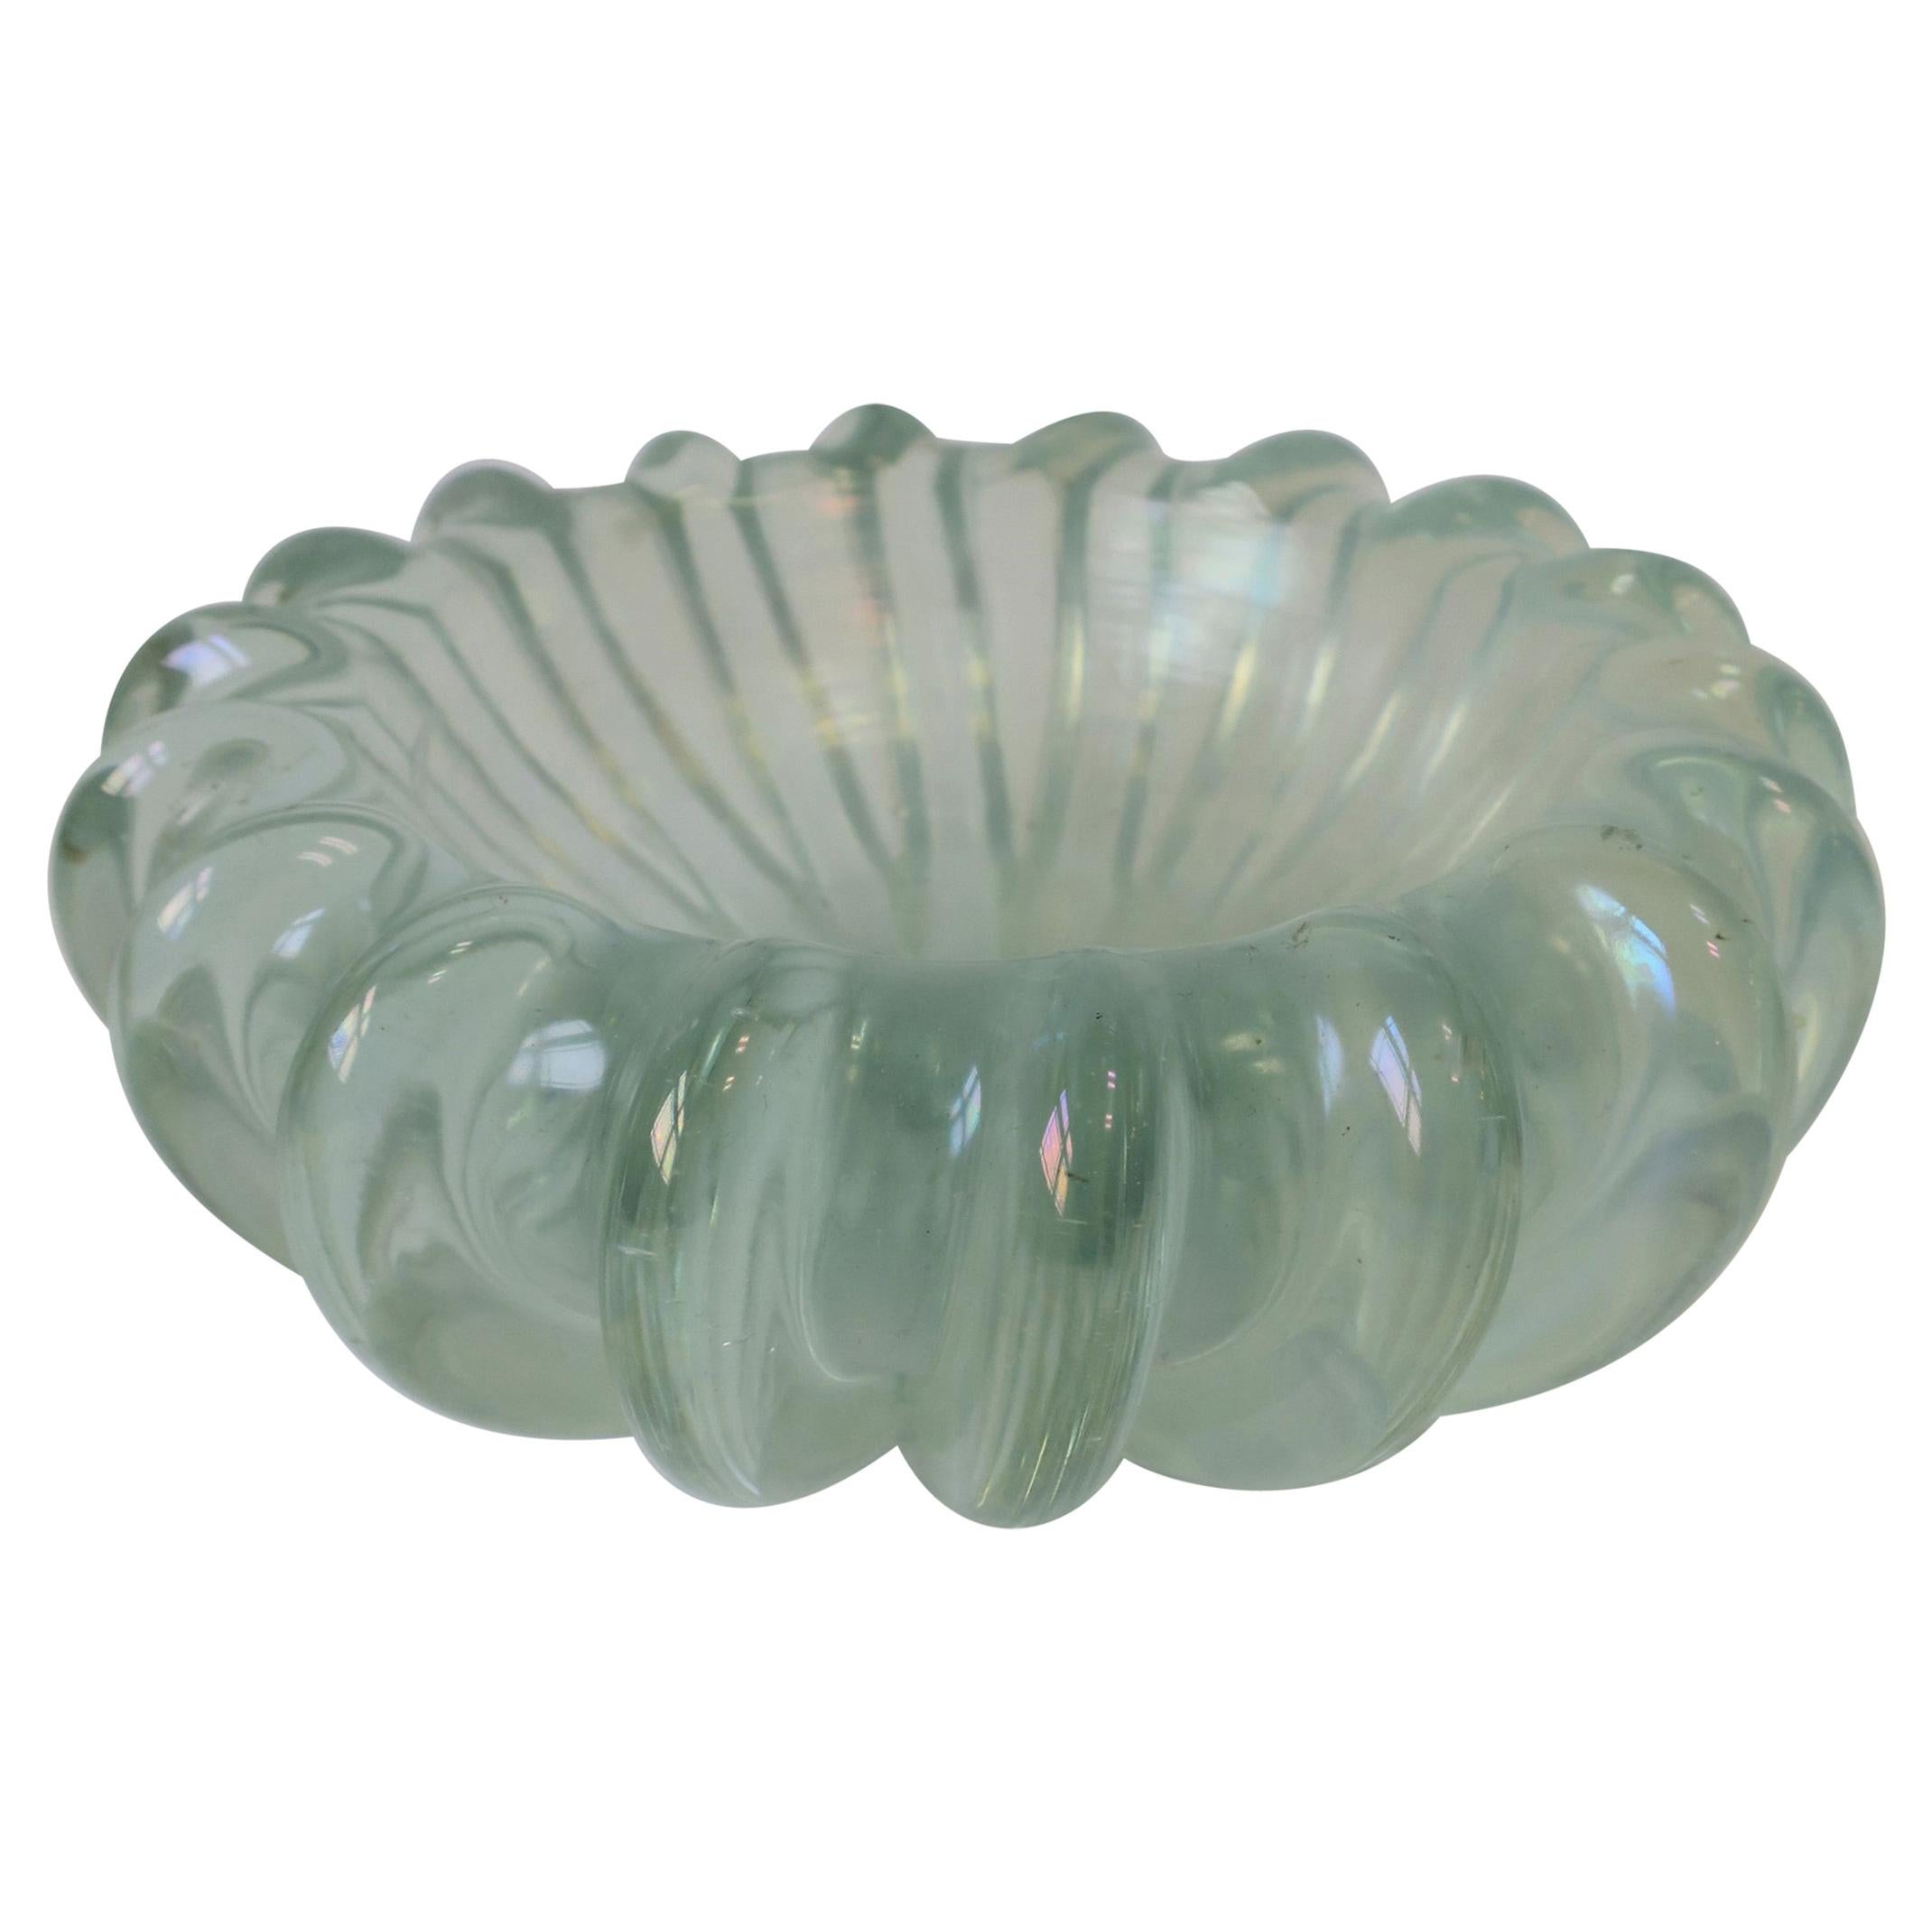 Italian Murano Art Glass Bowl with Iridescent Hue and Fluted Design For Sale